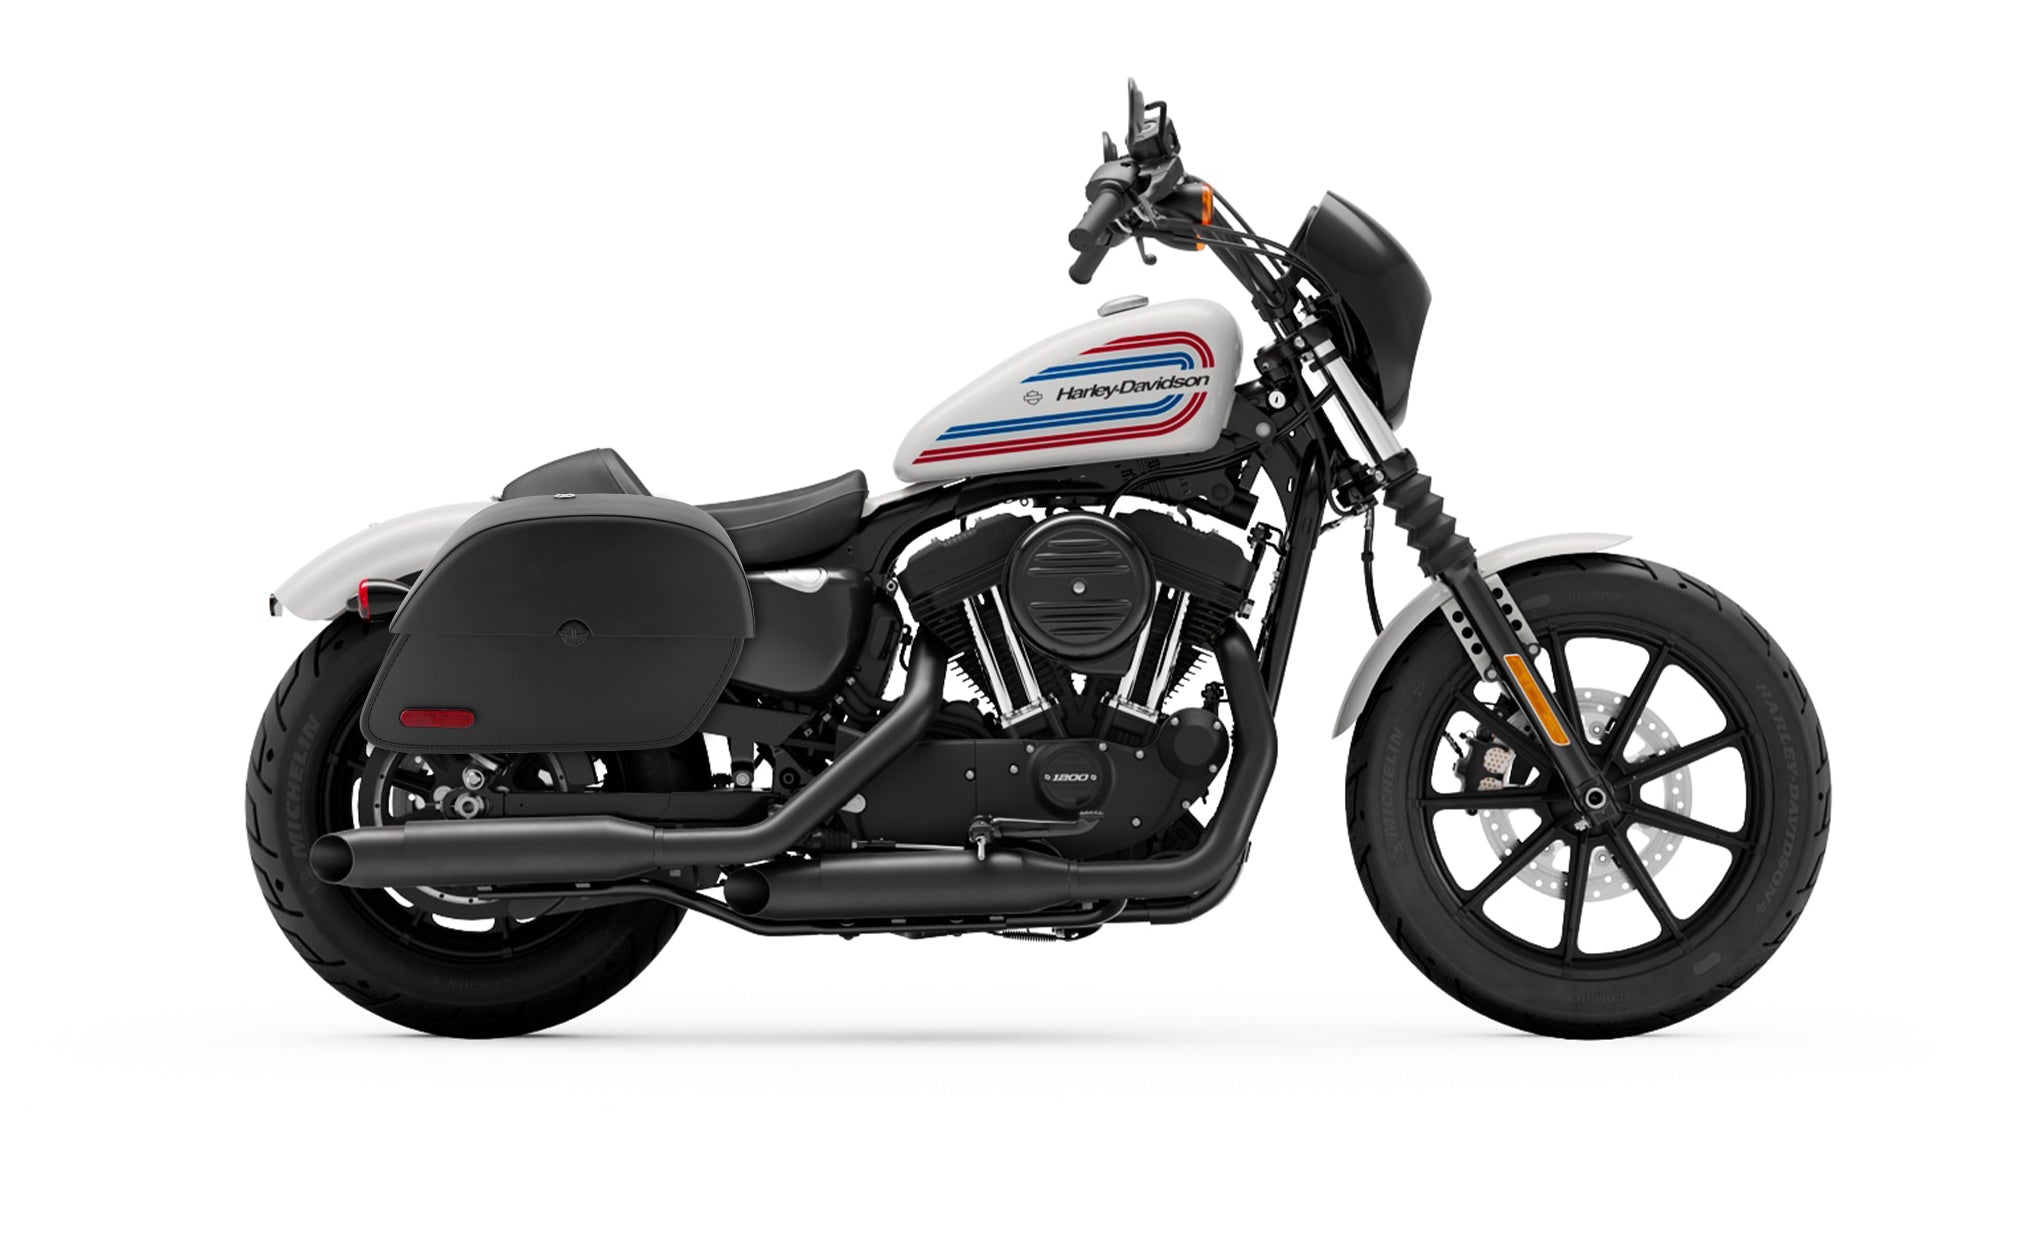 28L - Panzer Medium Quick Mount Leather Saddlebags For Harley Sportster 1200 Iron XL1200NS @expand